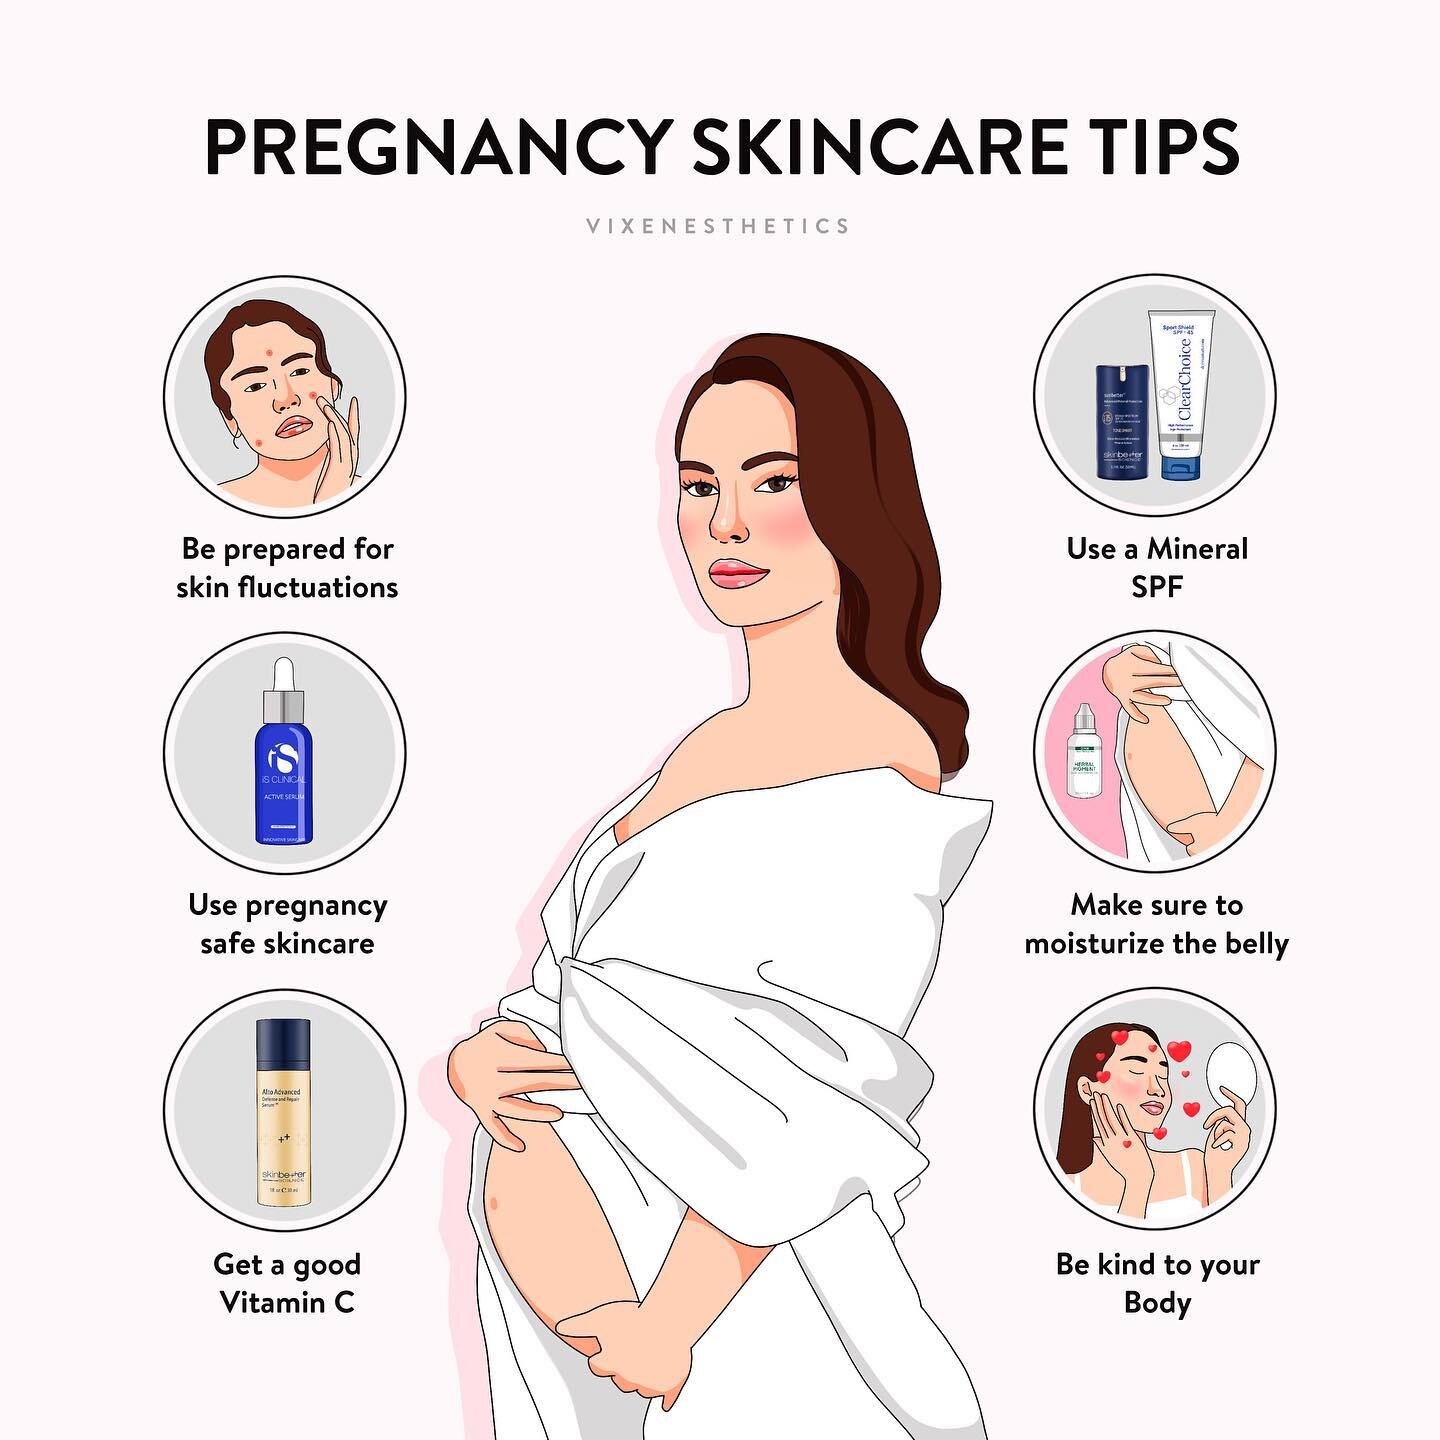 ✨Pregnancy Skincare Tips✨

🫶🏼 Your skin may experience fluctuations during pregnancy, but don't worry, it's normal! Especially hormonal acne &amp; increased sensitivity. 
🫶🏼 To keep your skin looking its best, use pregnancy-safe actives like iSCl